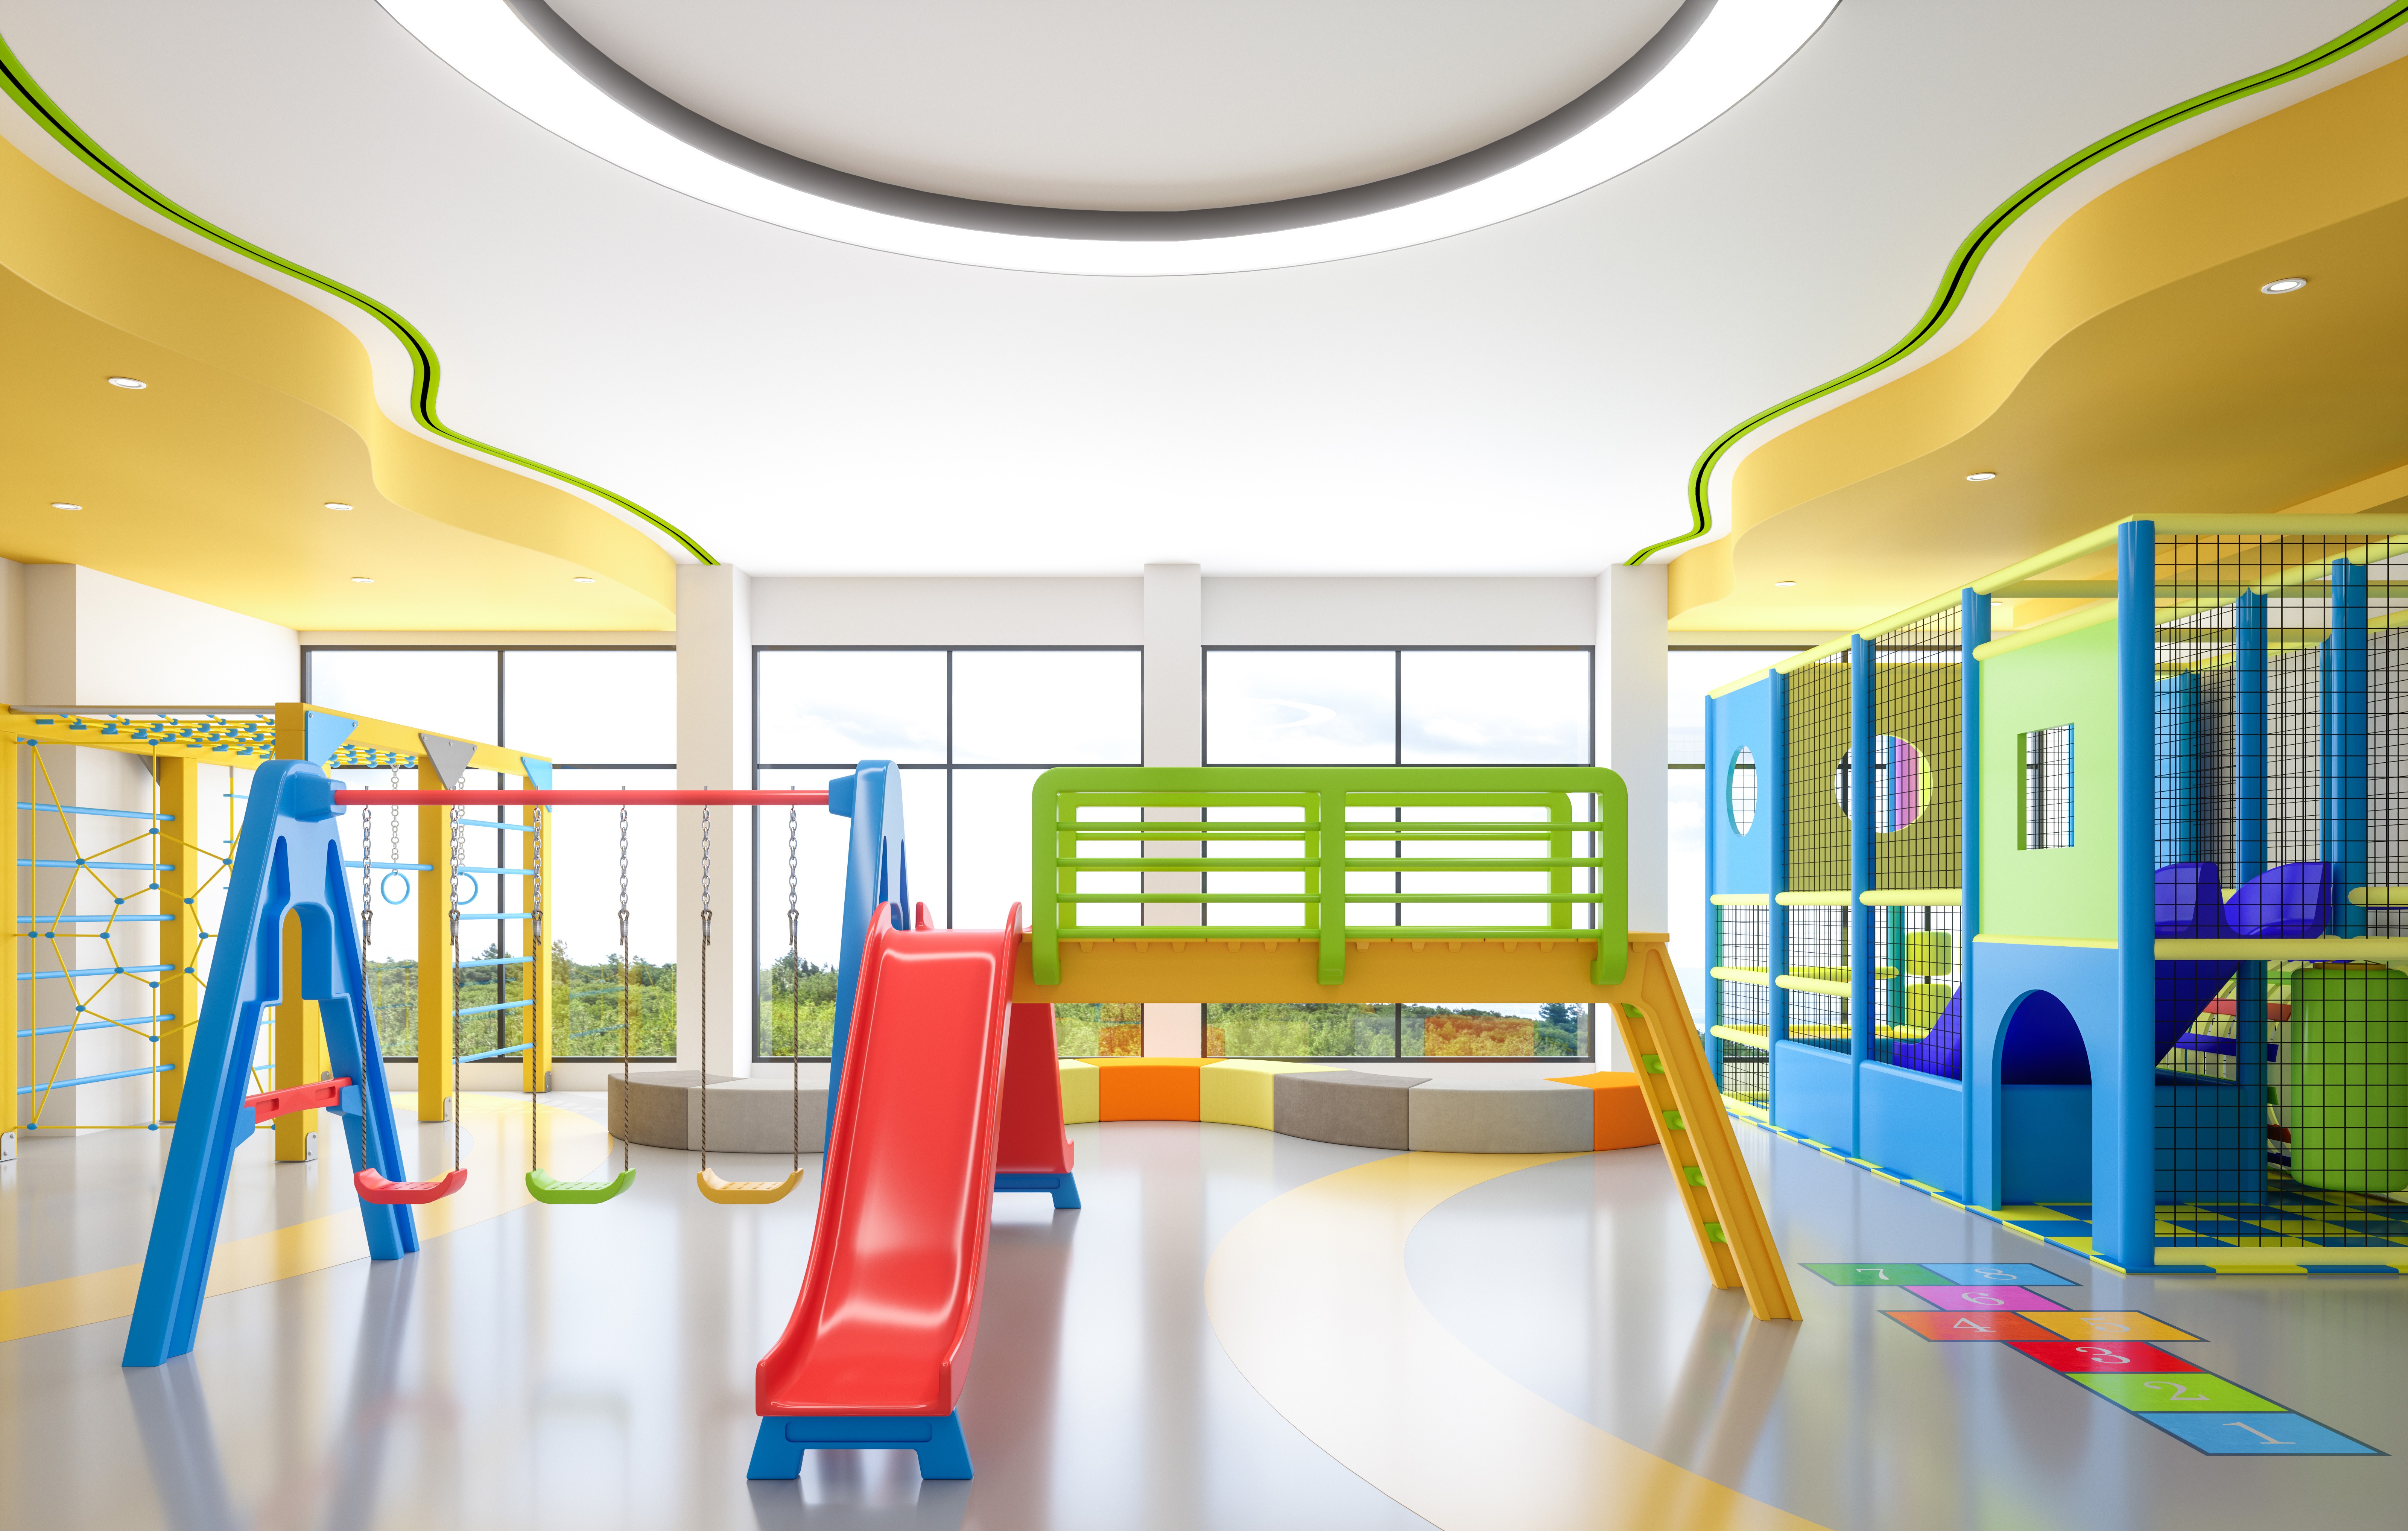 Indoor playground with a bright green slot diffuser installed in the ceiling